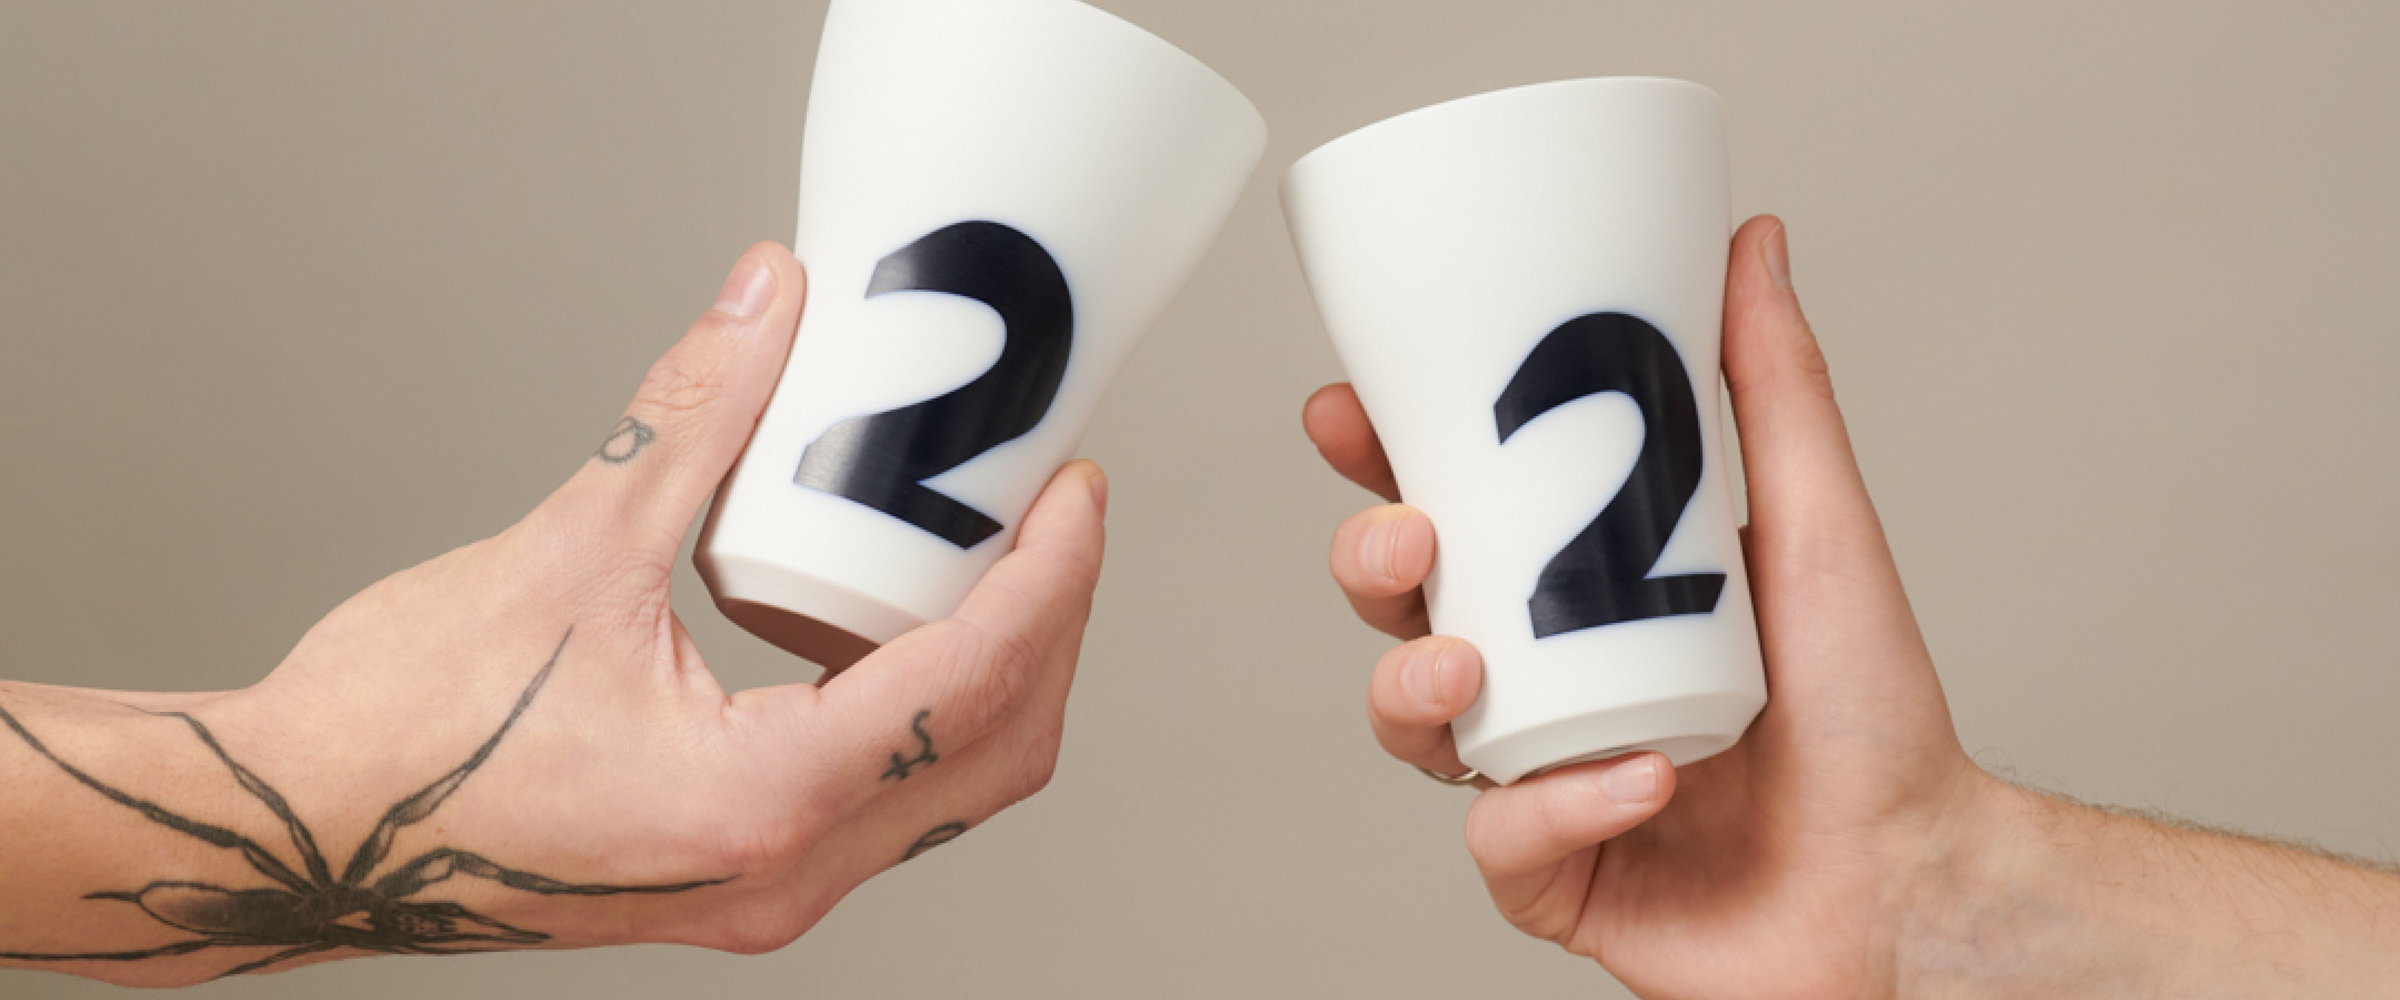 HB_22_Cups